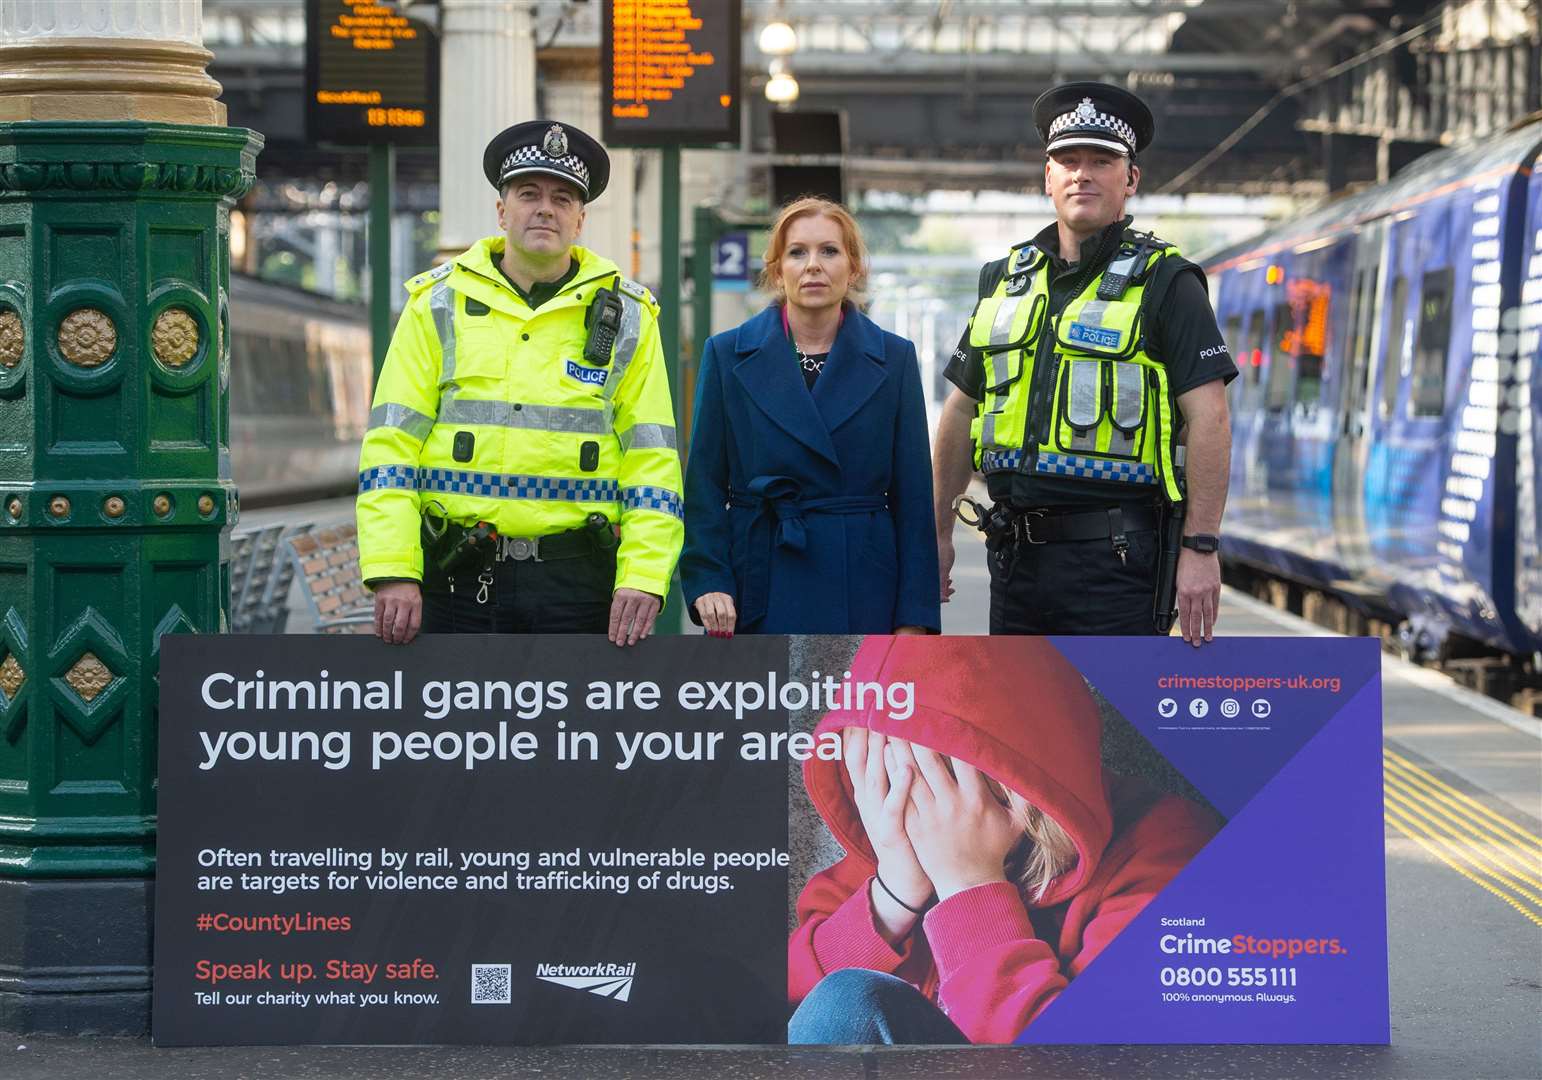 Chief Inspector Neill Whiteside, Minister for Community Safety Ash Reagan, and Chief Inspector Brian McAleese BTP at Waverley Station, Edinburgh, Scotland, launching a new Crimestoppers campaign in partnership with Network Rail and British Transport Police to highlight how criminal ‘County Lines’ gangs target young people and exploit them to carry cash, drugs and weapons.